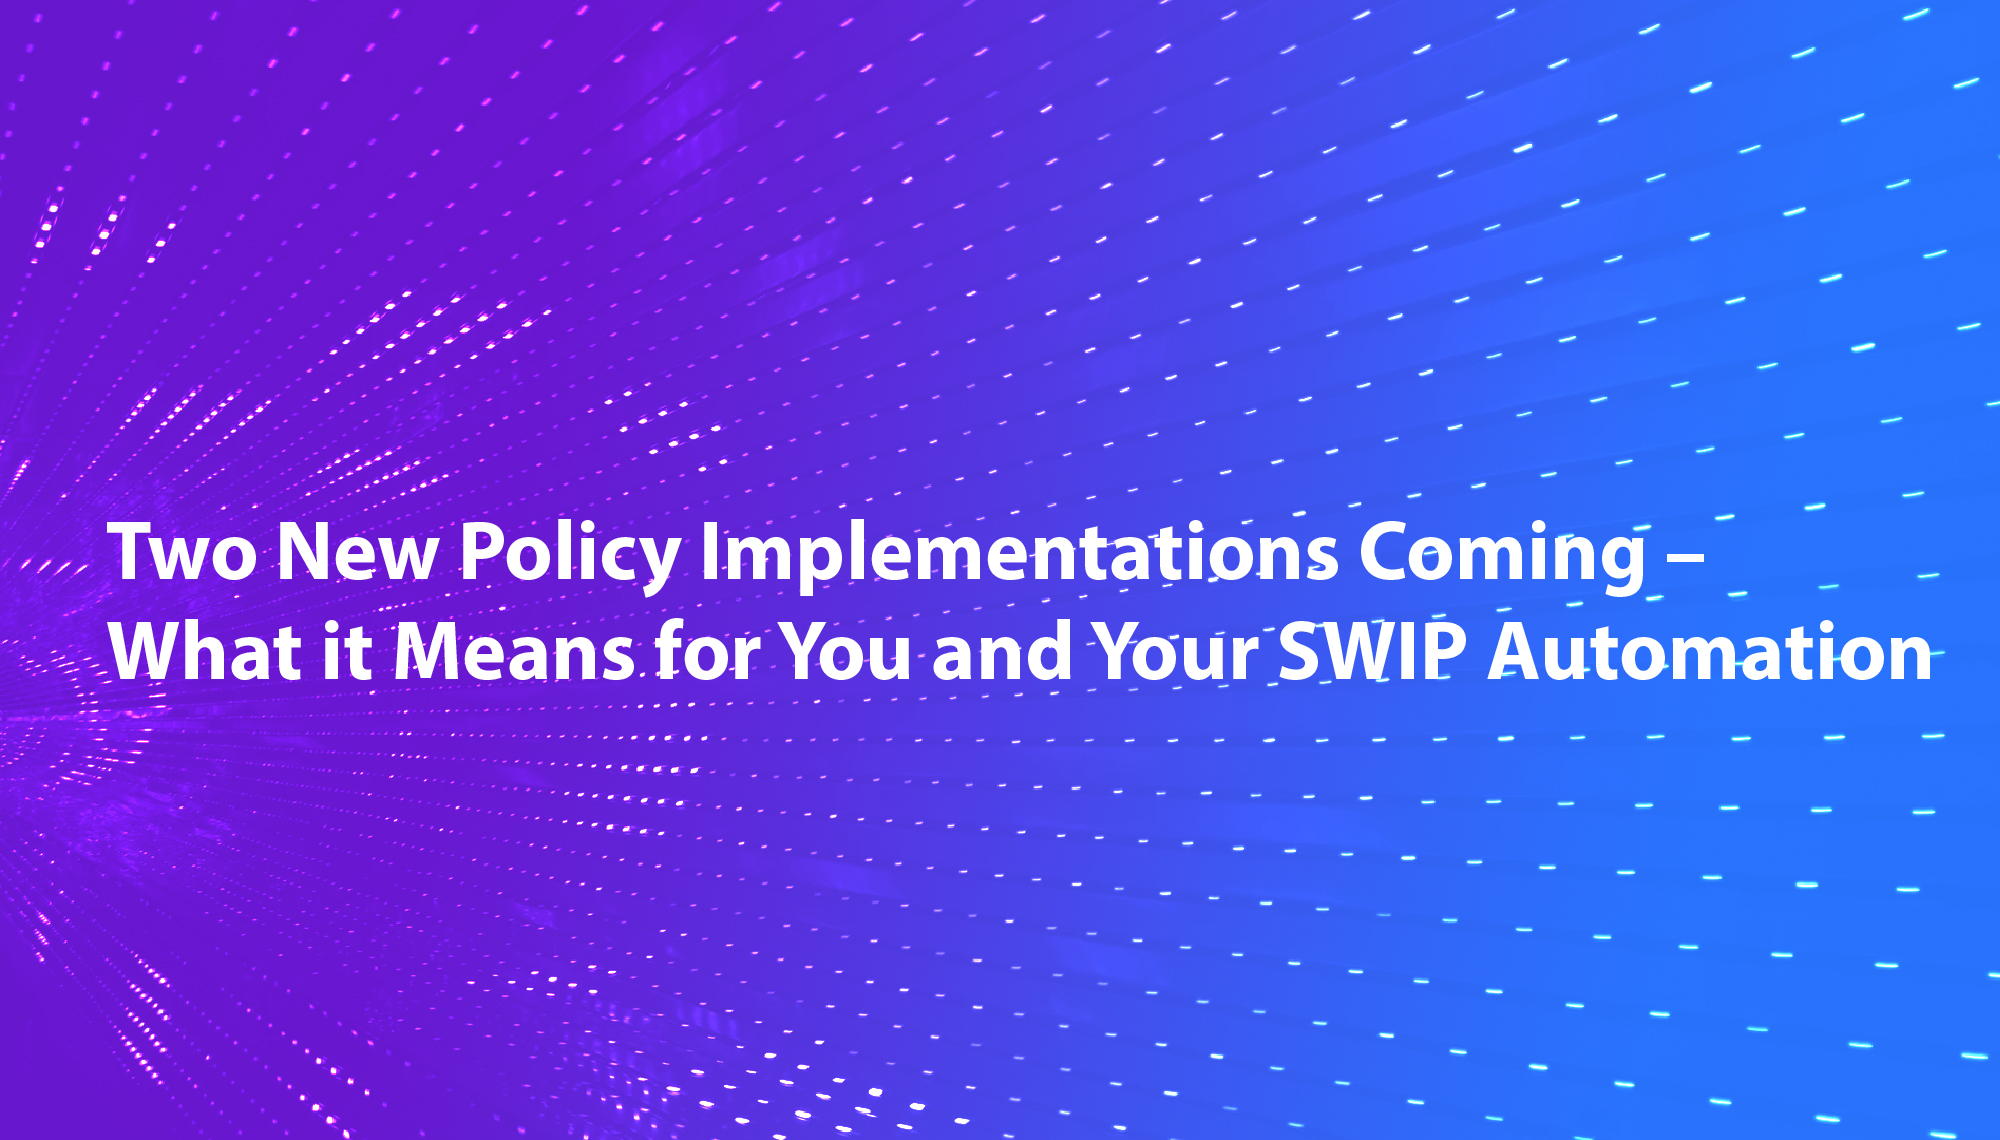 Two New Policy Implementations Coming – What it Means for You and Your SWIP Automation